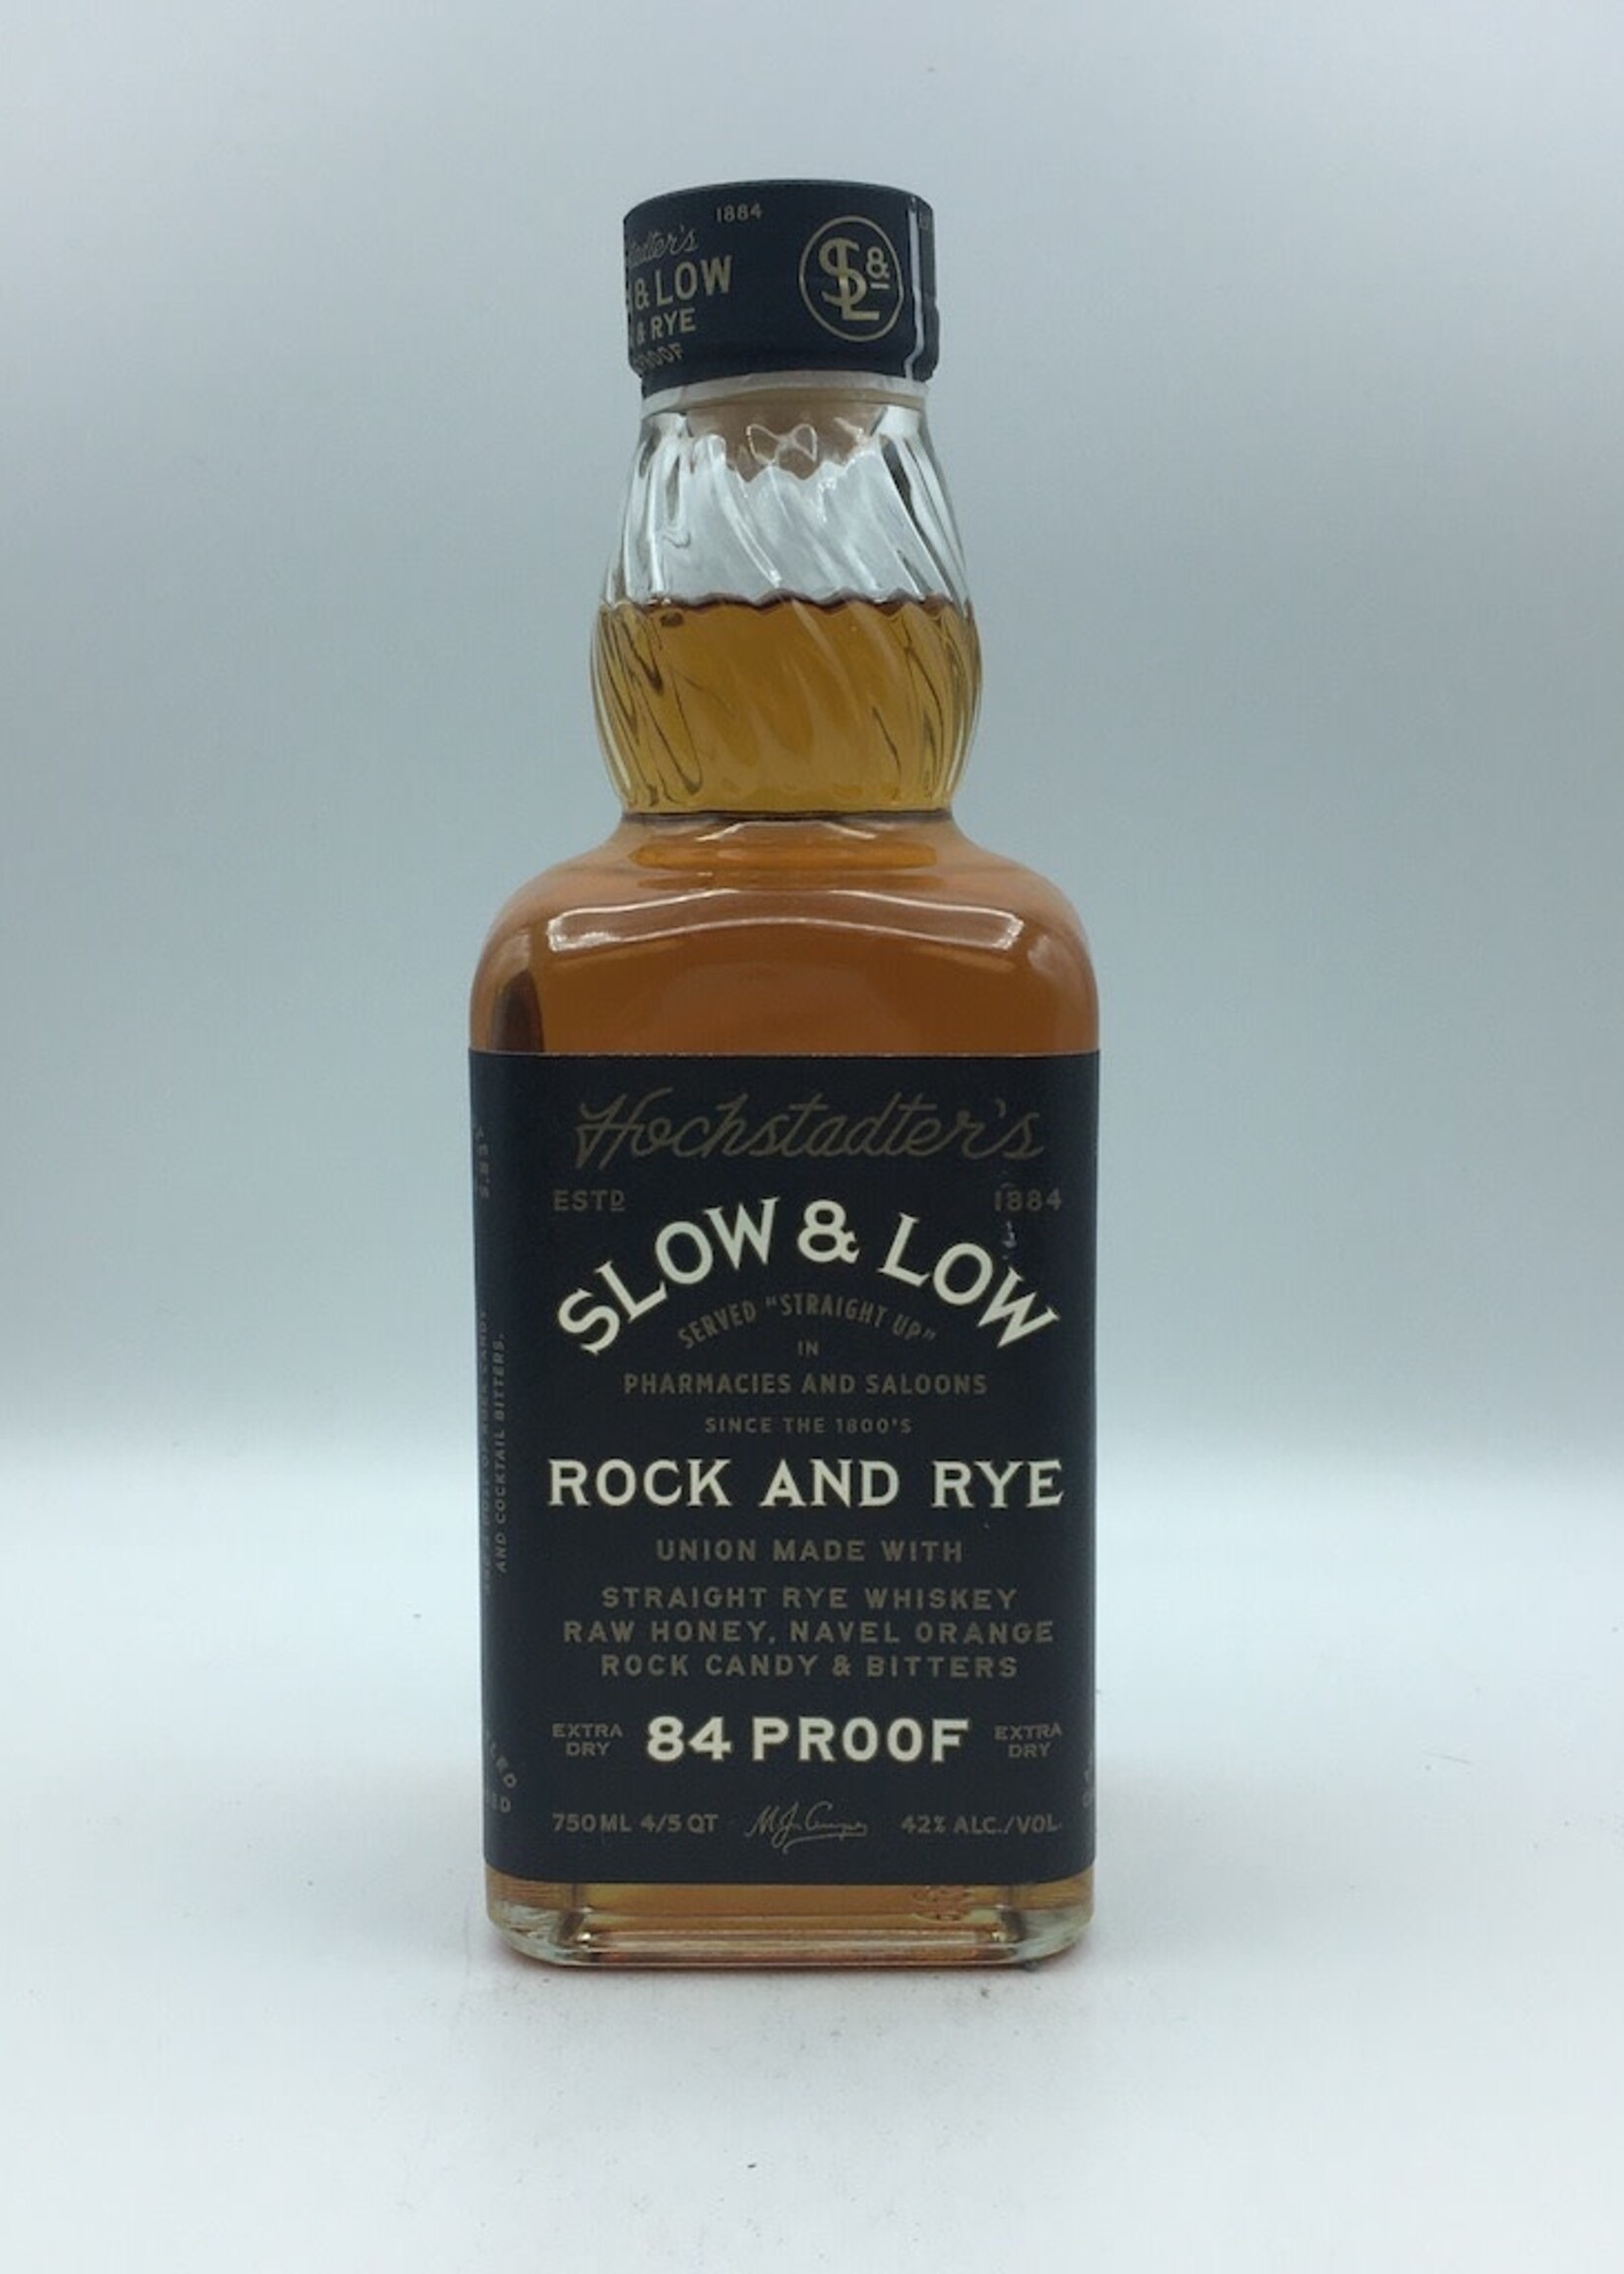 Hochstadter's Slow and Low Rye Whiskey 750ML